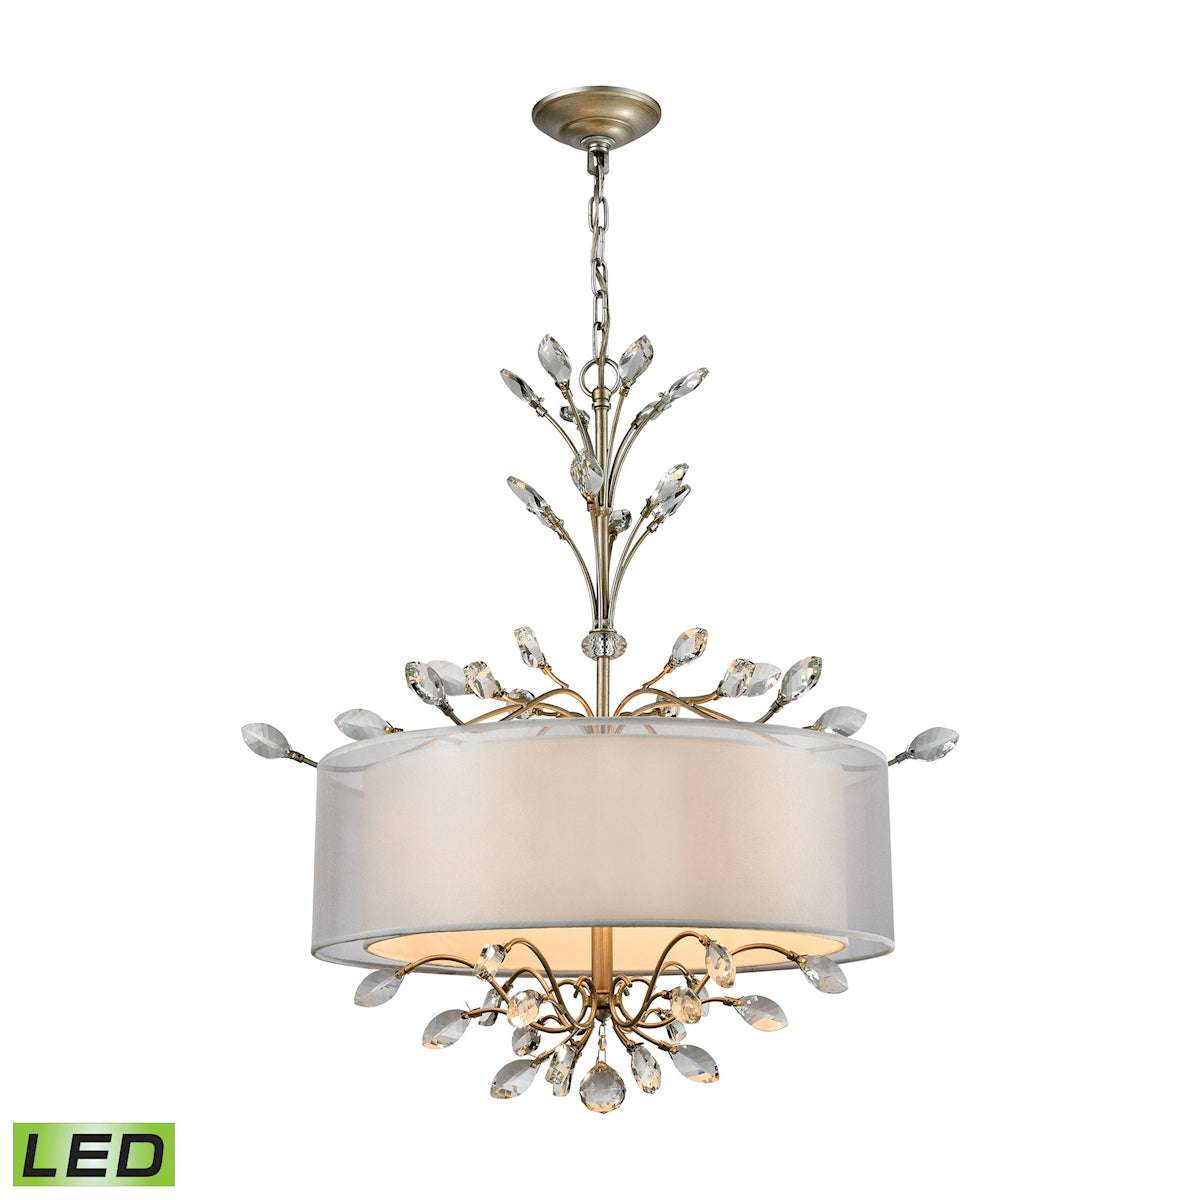 Asbury 4-Light Chandelier in Aged Silver with Organza and White Fabric Shade - Includes LED Bulbs